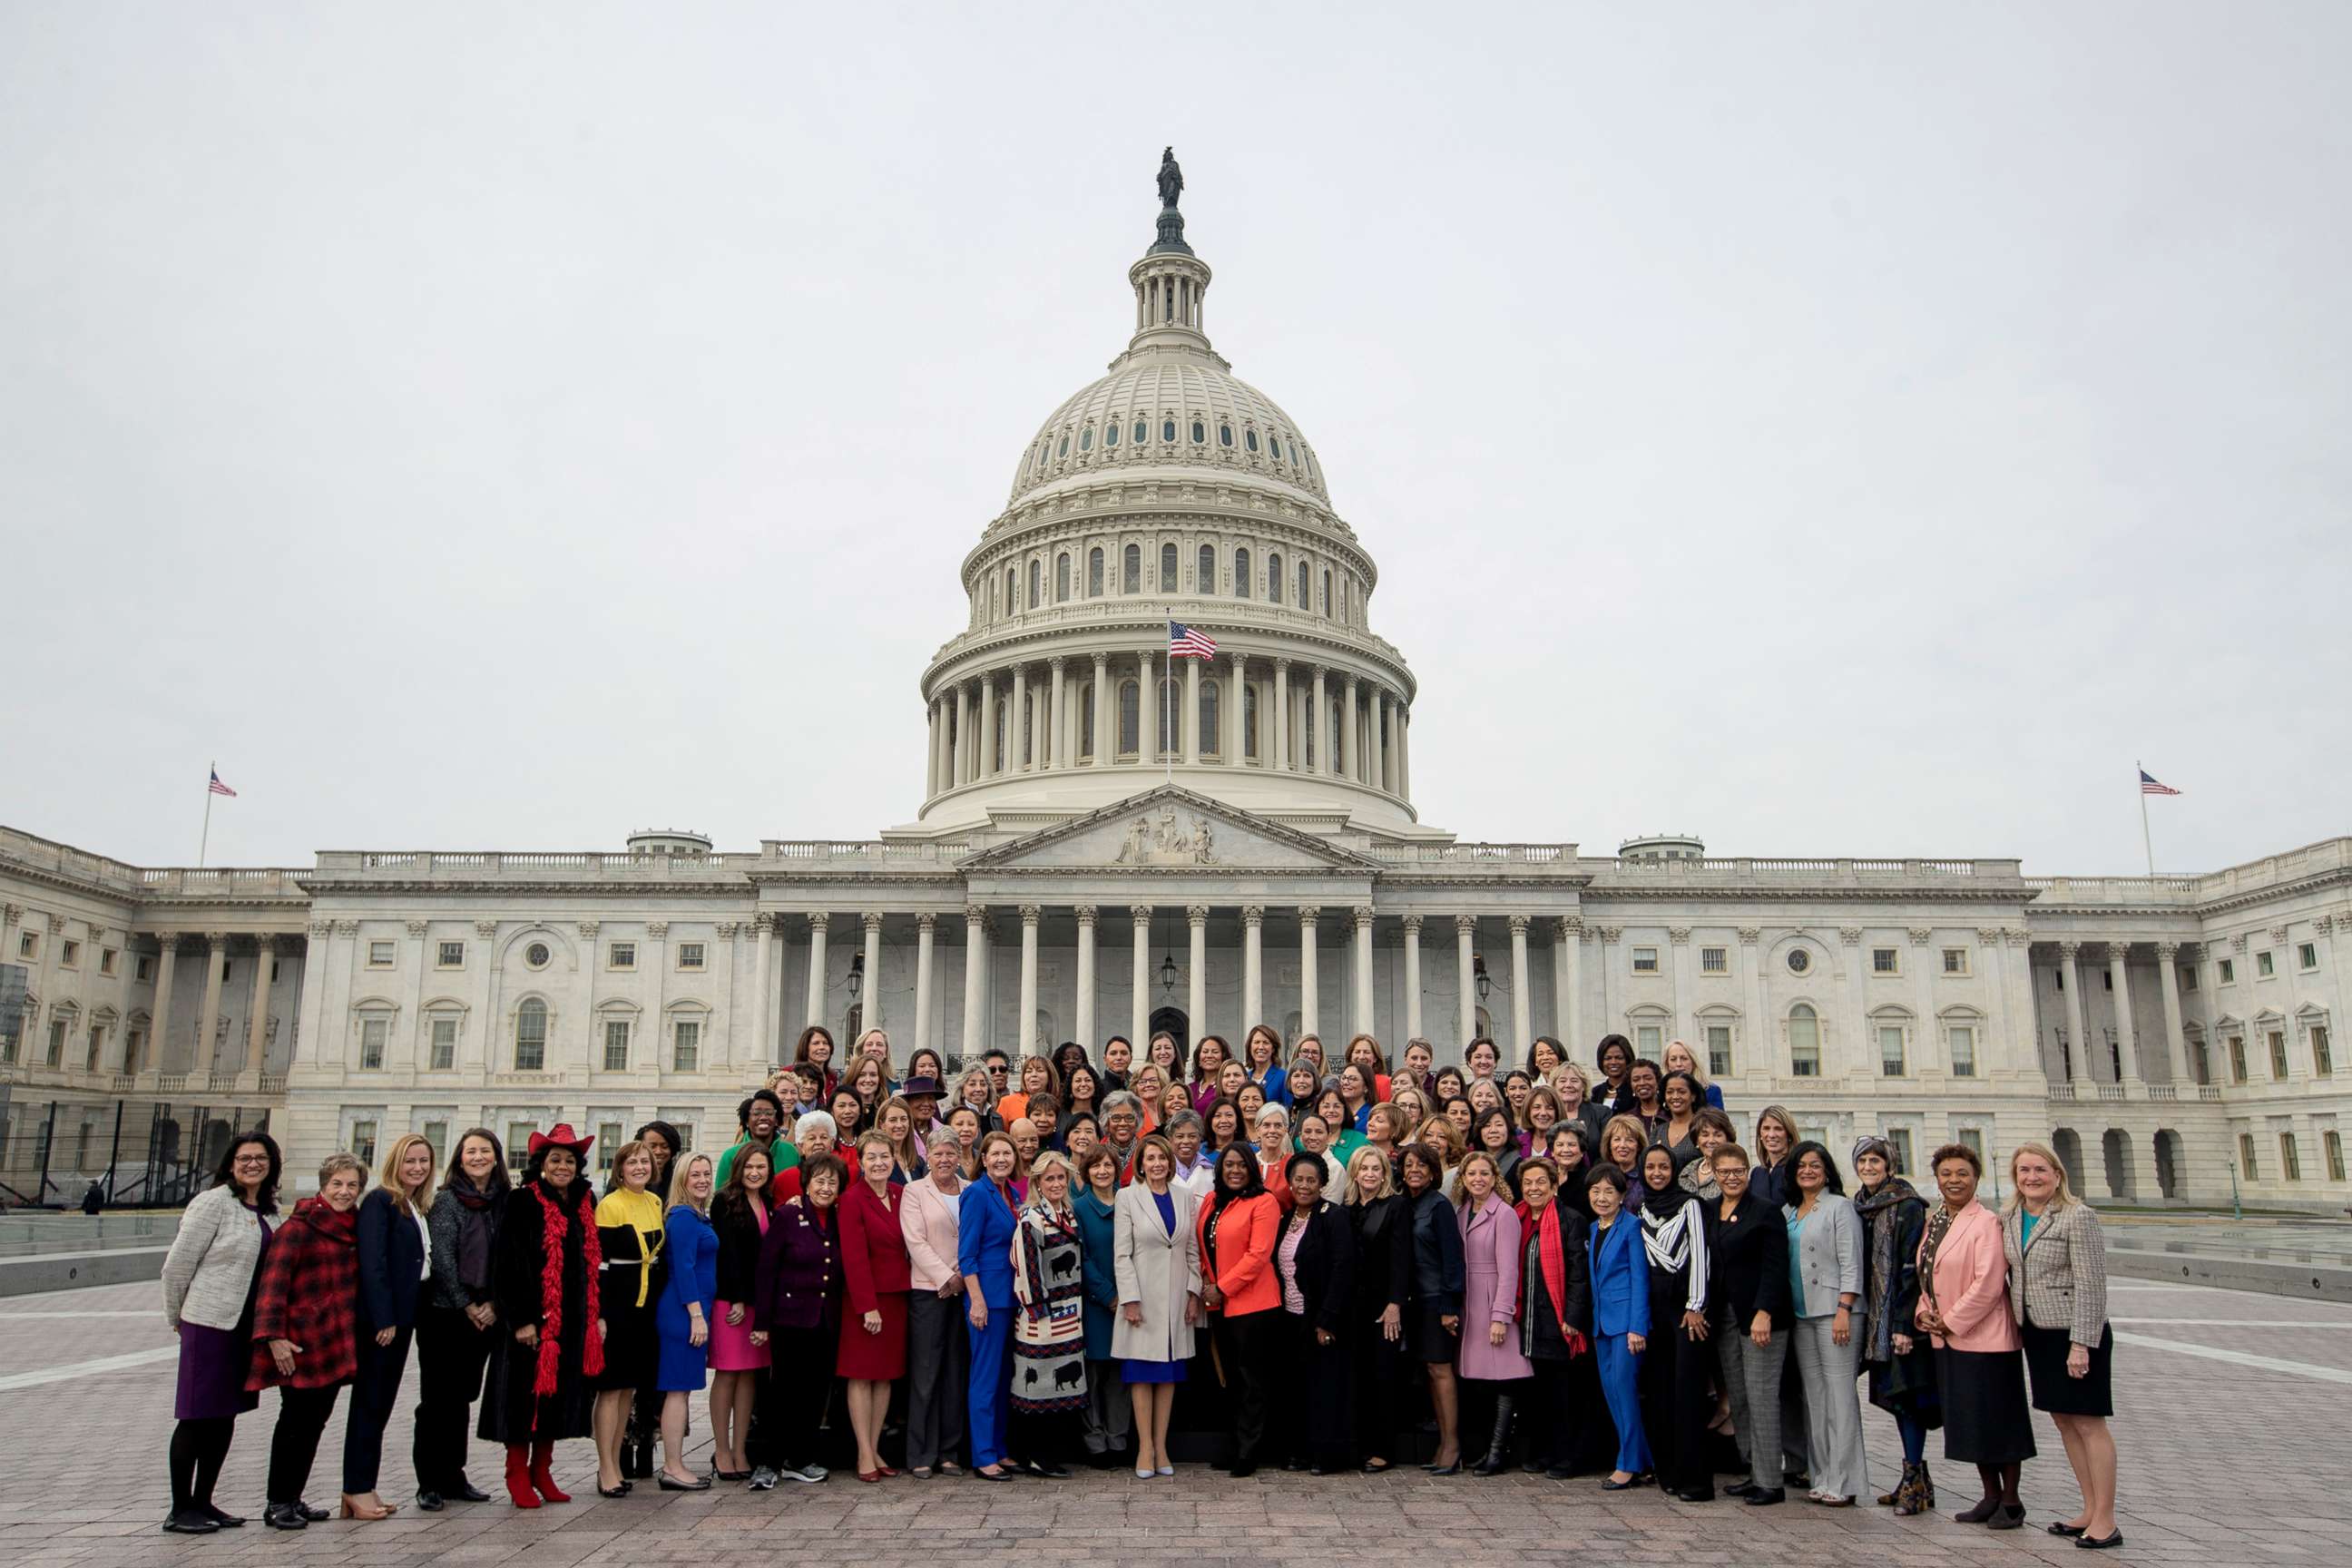 PHOTO: House Speaker Nancy Pelosi of Calif., center, poses with all House Democratic women members of the 116th Congress on the East Front Capitol Plaza on Capitol Hill in Washington, Jan. 4, 2019, as the 116th Congress begins.